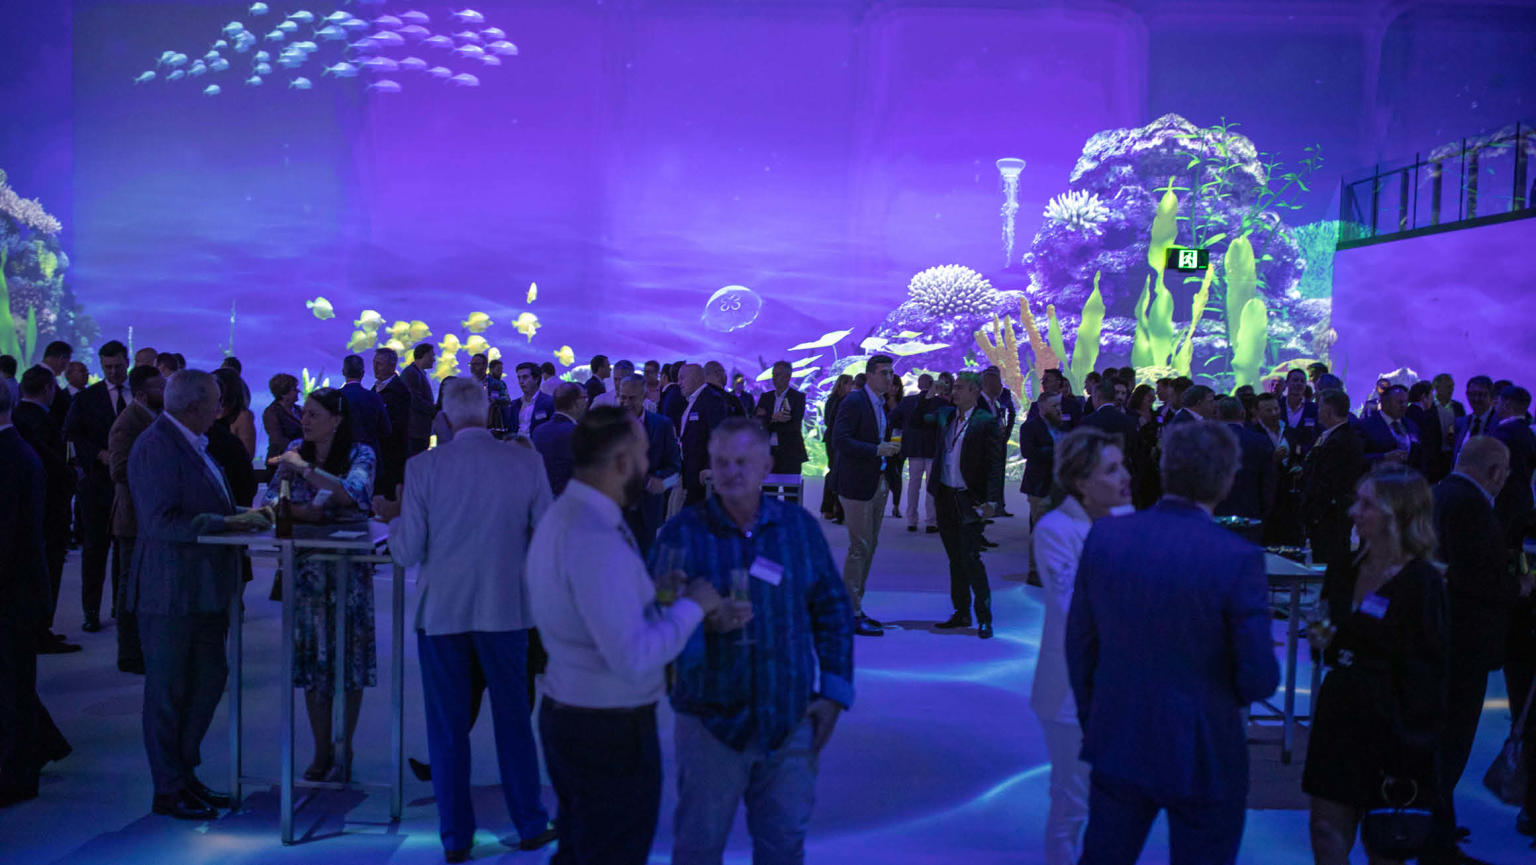 A large crowd assembled in a spacious room enveloped by expansive digital screens. The screens depict a mesmerising underwater scene with shades of purple, immersing the audience in a captivating aquatic atmosphere.